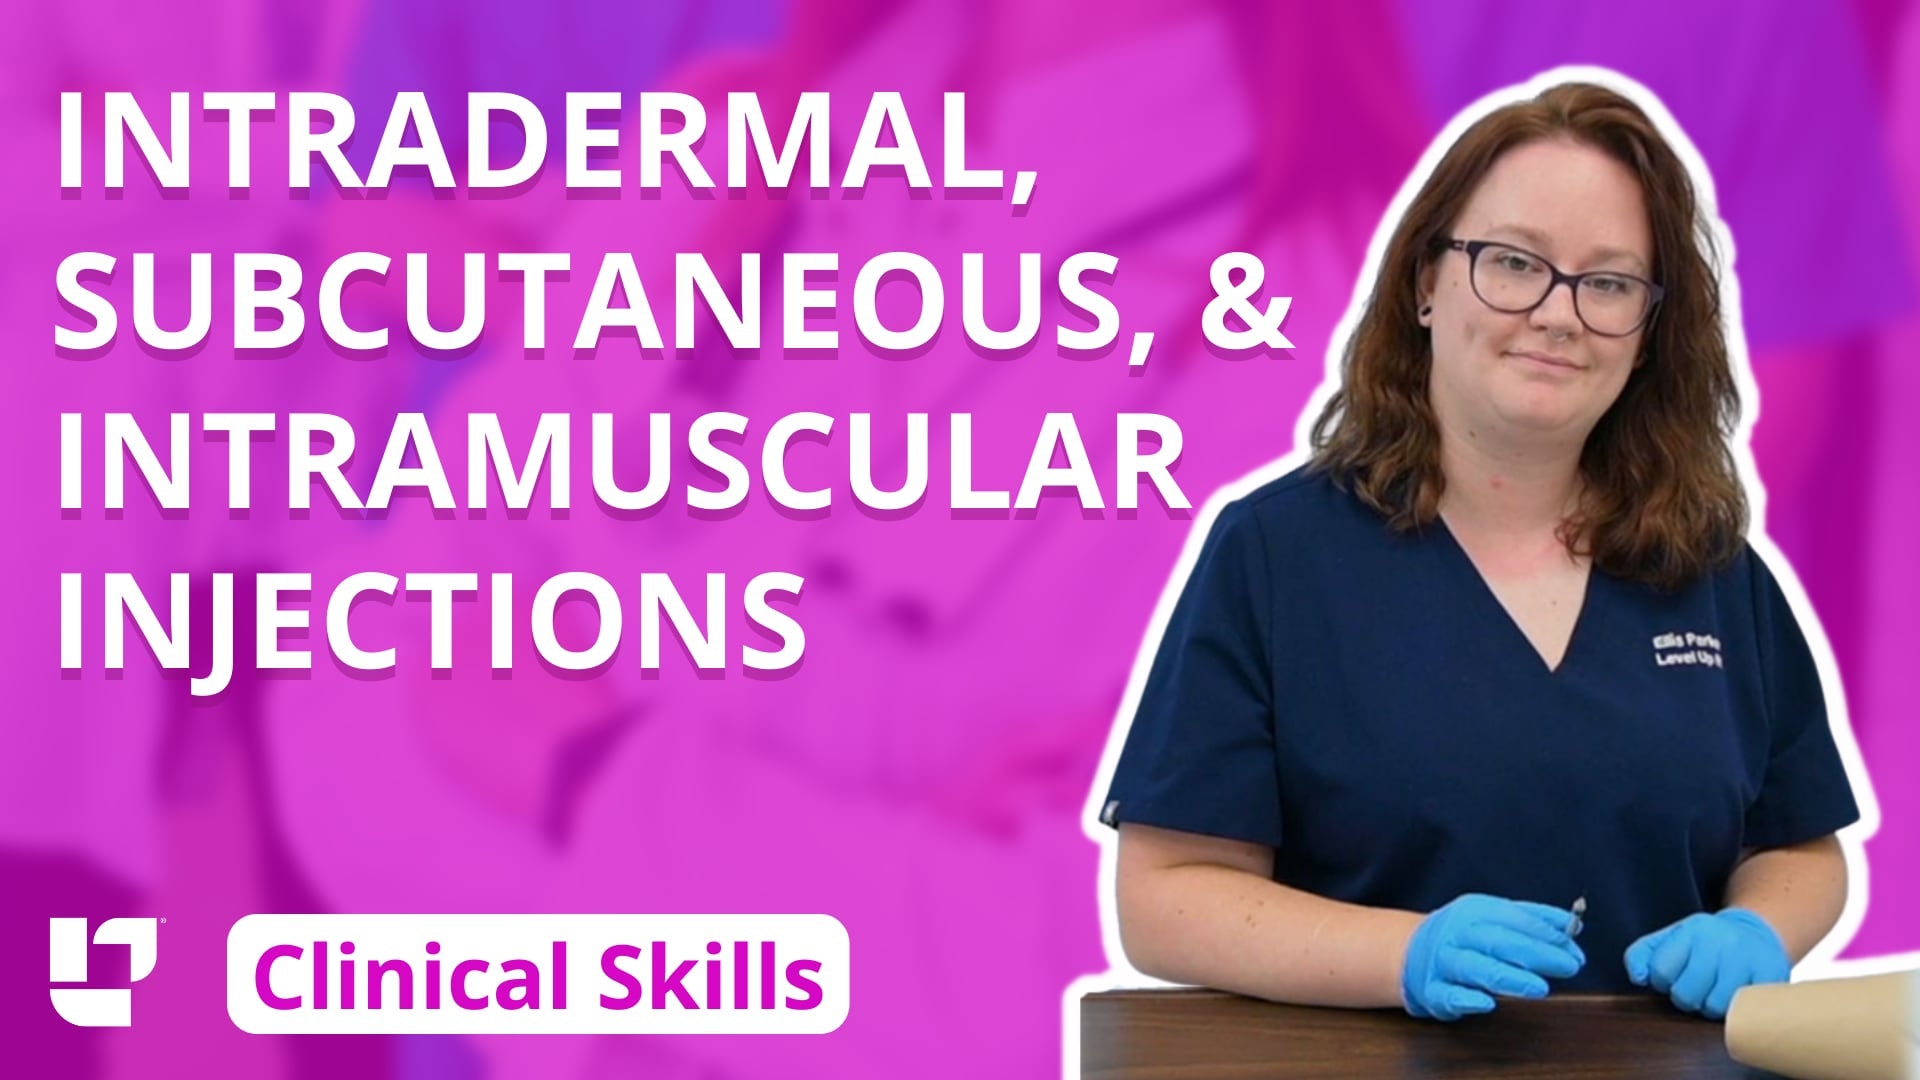 Clinical Skills - Intradermal, Subcutaneous, and Intramuscular Injections - LevelUpRN